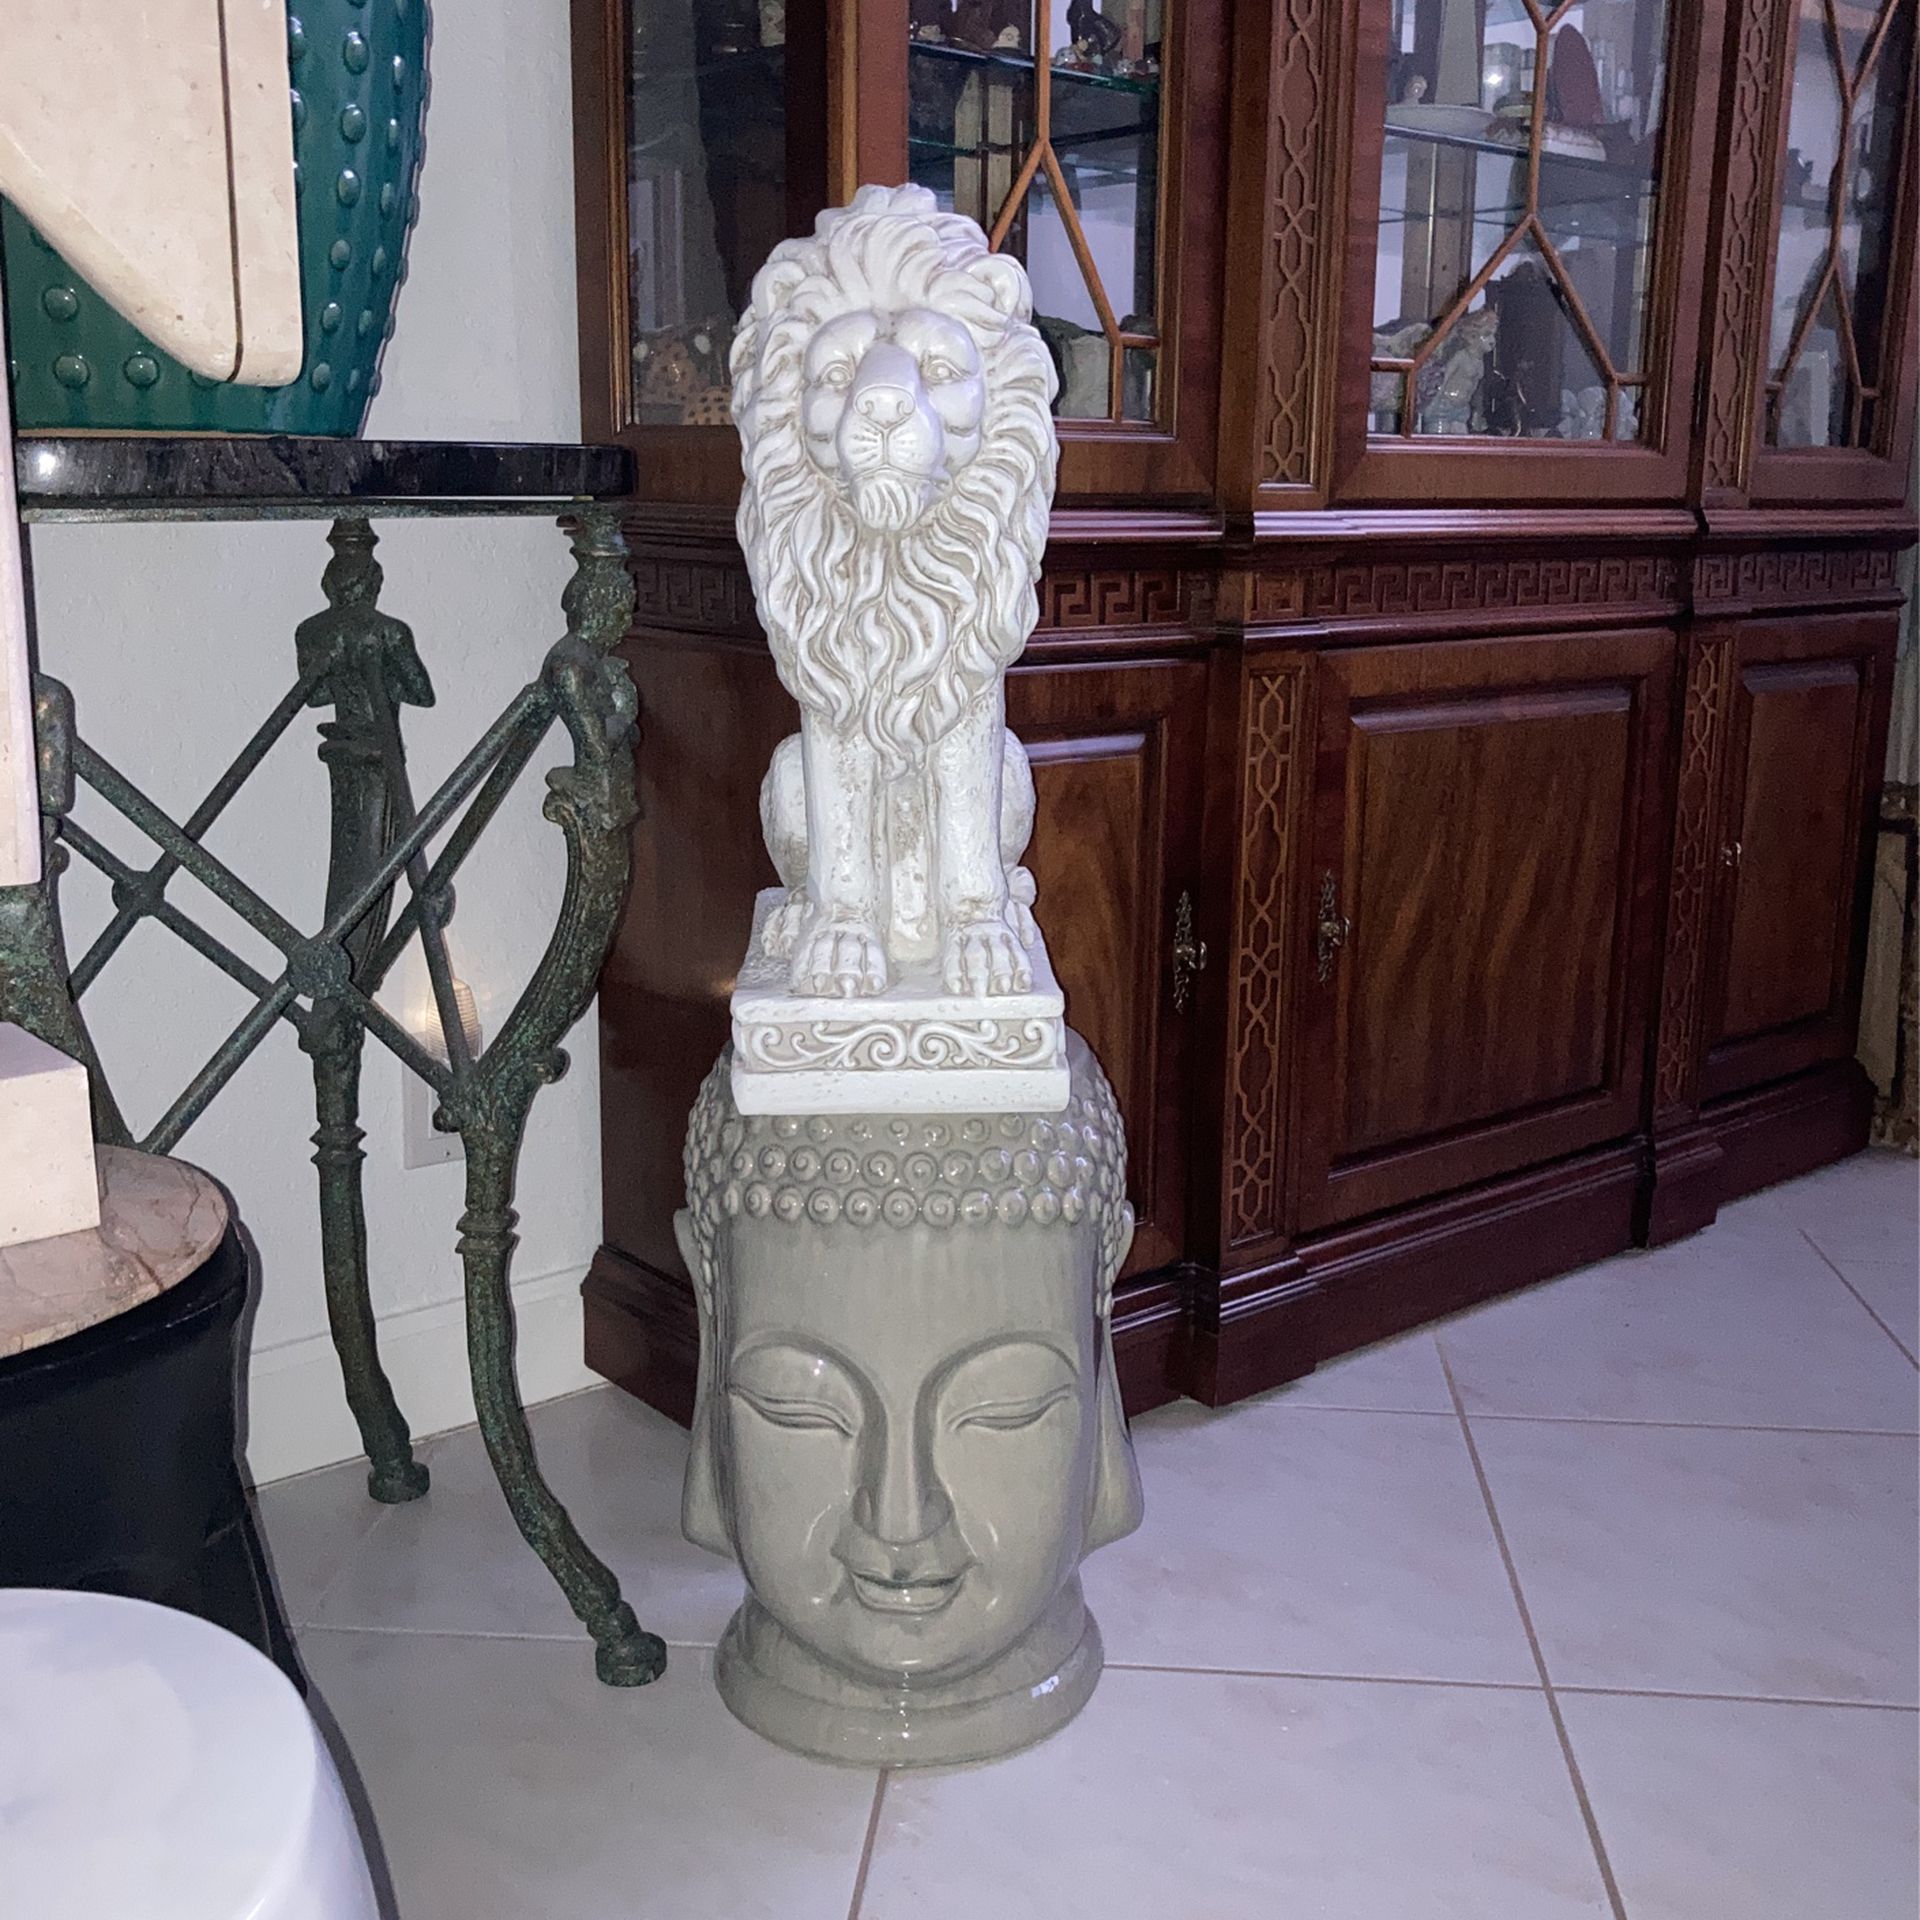 Gorgeous Ceramic Gray Zen Asian Chinese Chinoiserie Buddha Head Garden Stool & Majestic Indoor Outdoor Lion Statue.  The 2 New Pieces…